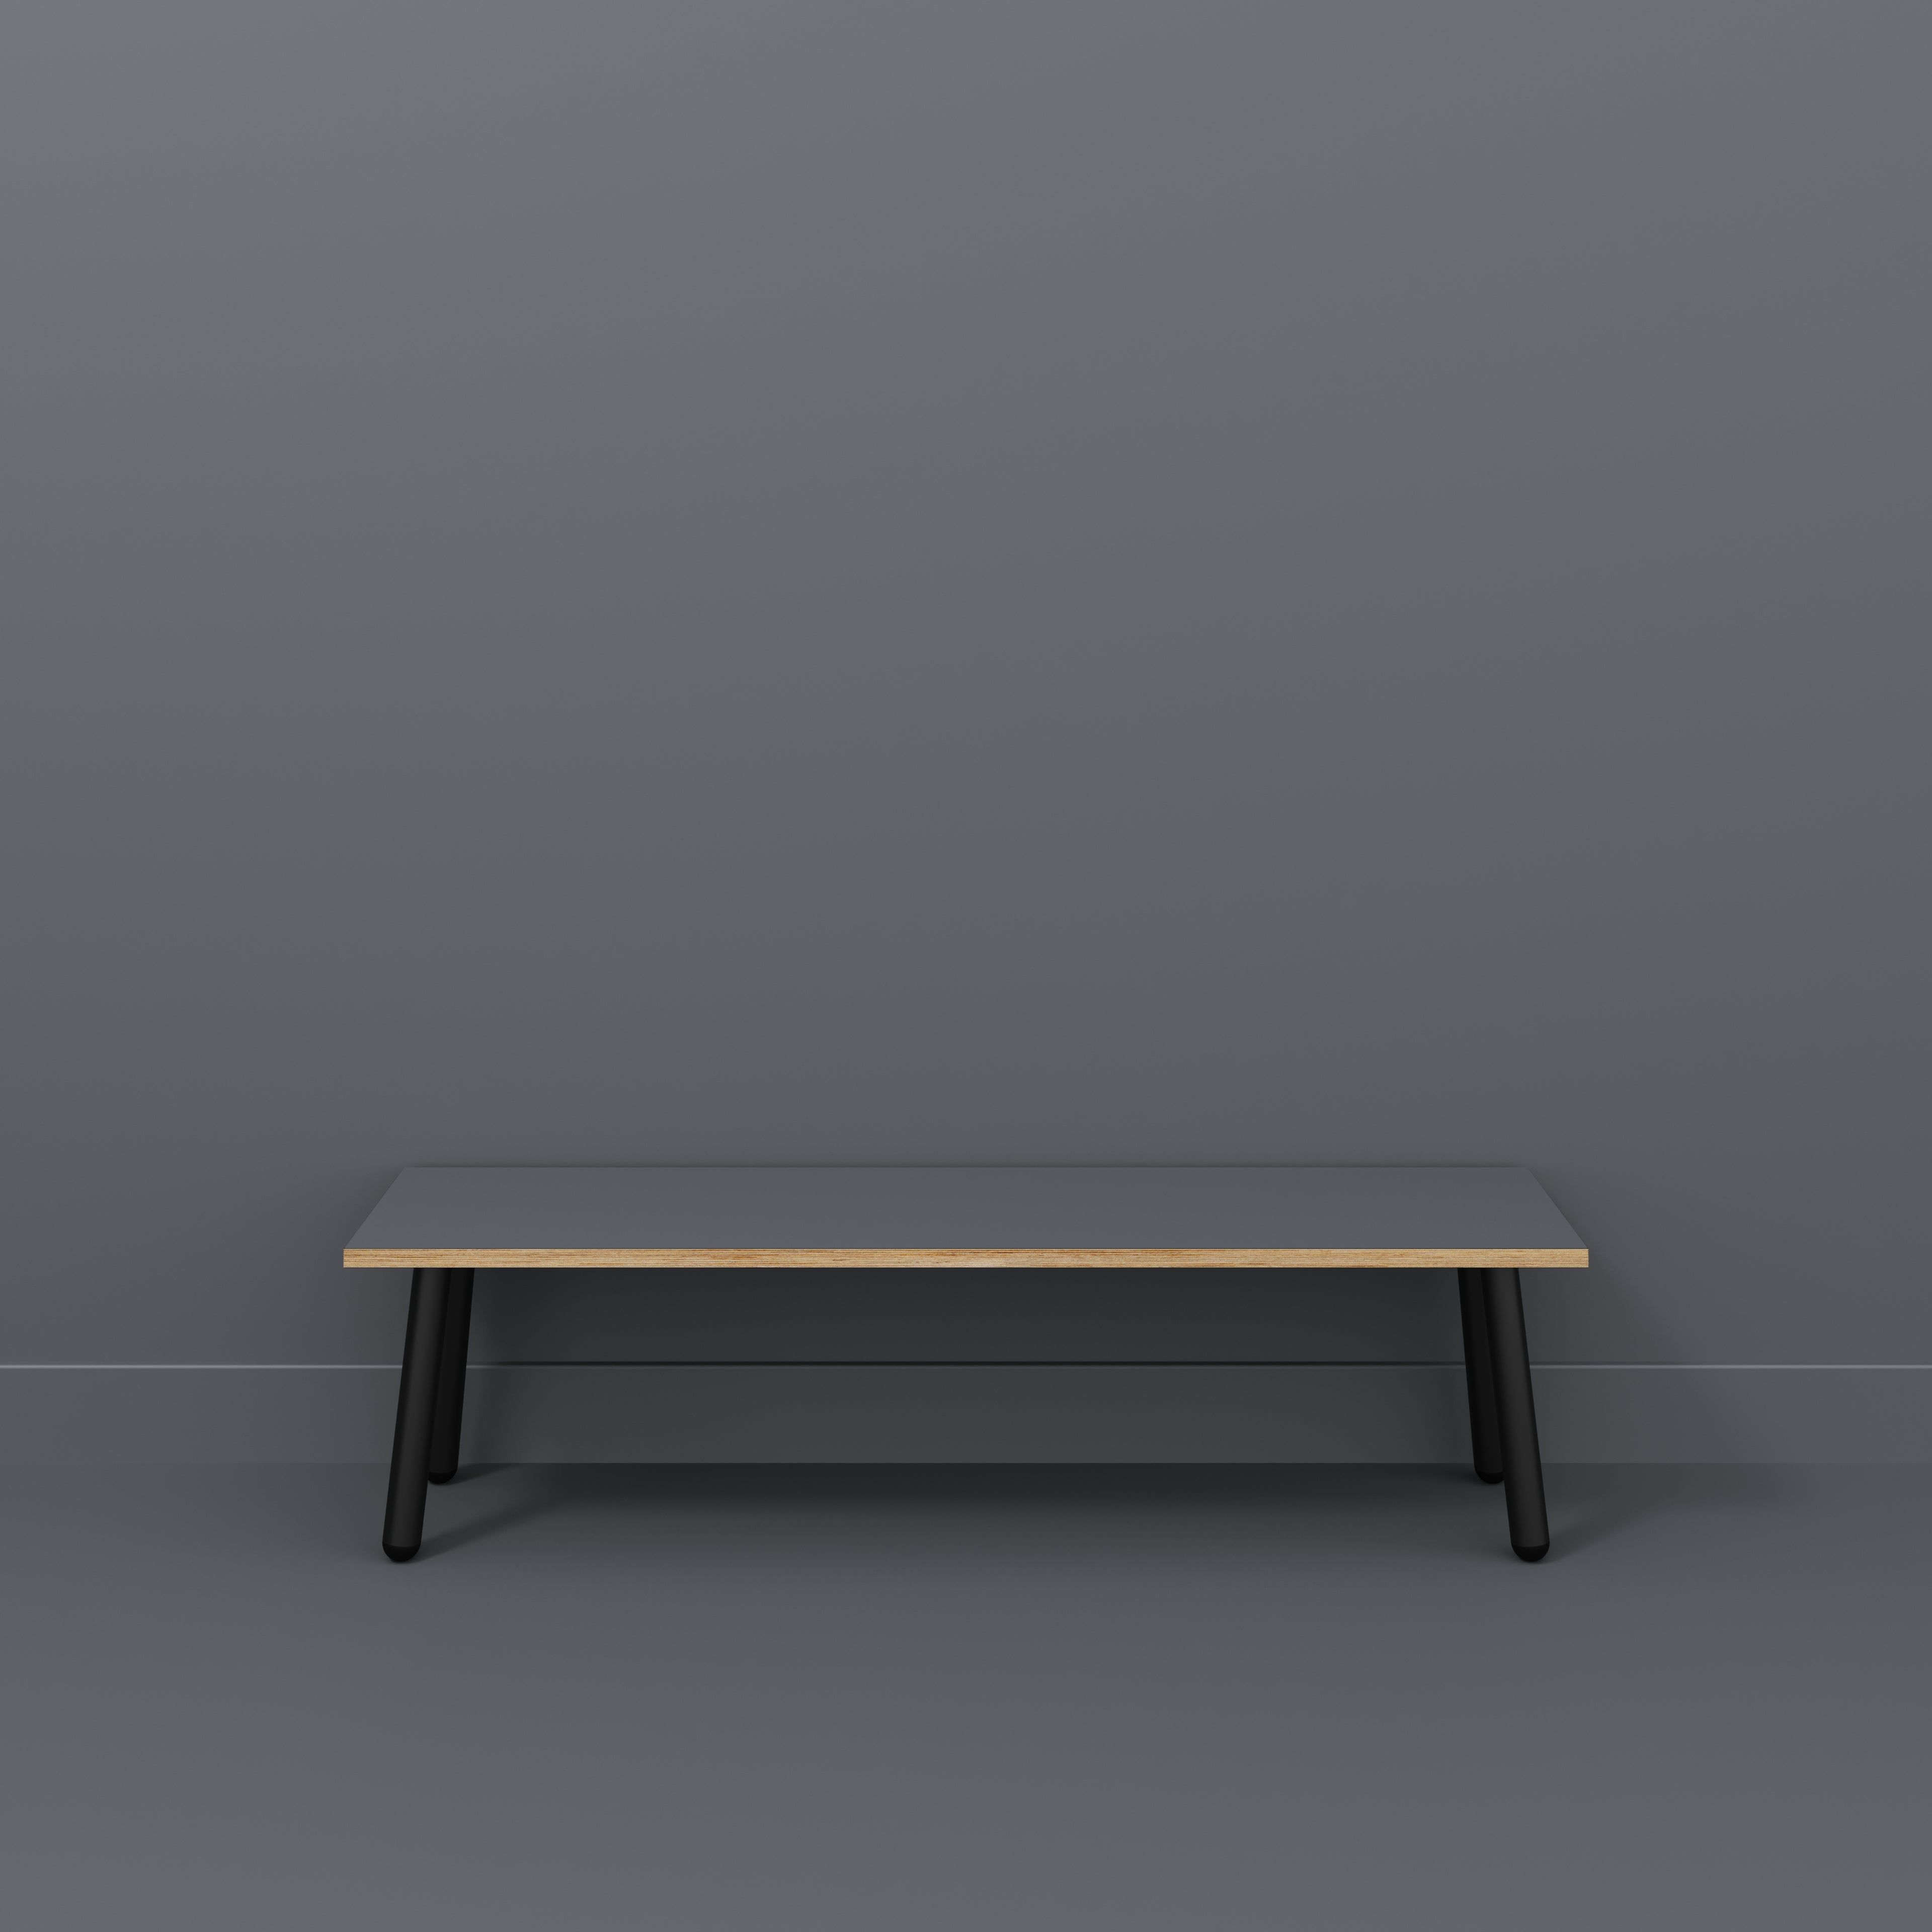 Bench Seat with Black Round Single Pin Legs - Formica Tornado Grey - 1600(w) x 400(d)